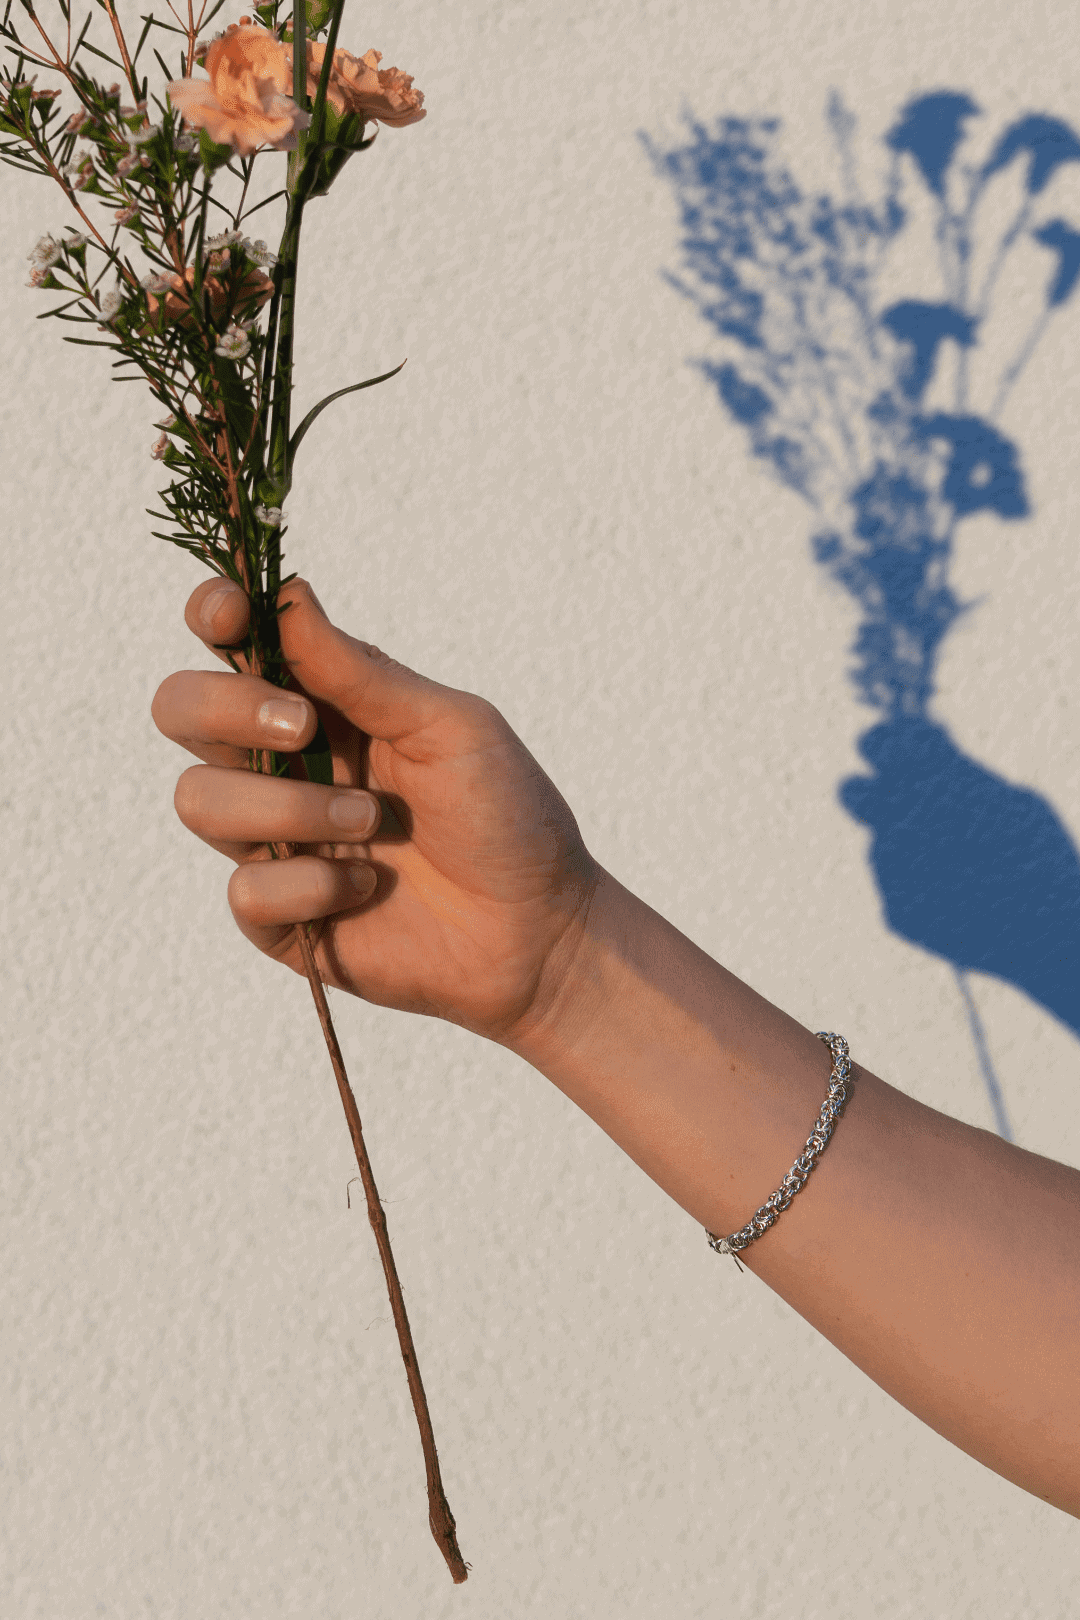 The model presents a silver bracelet on her hand, holding flowers in her hand.